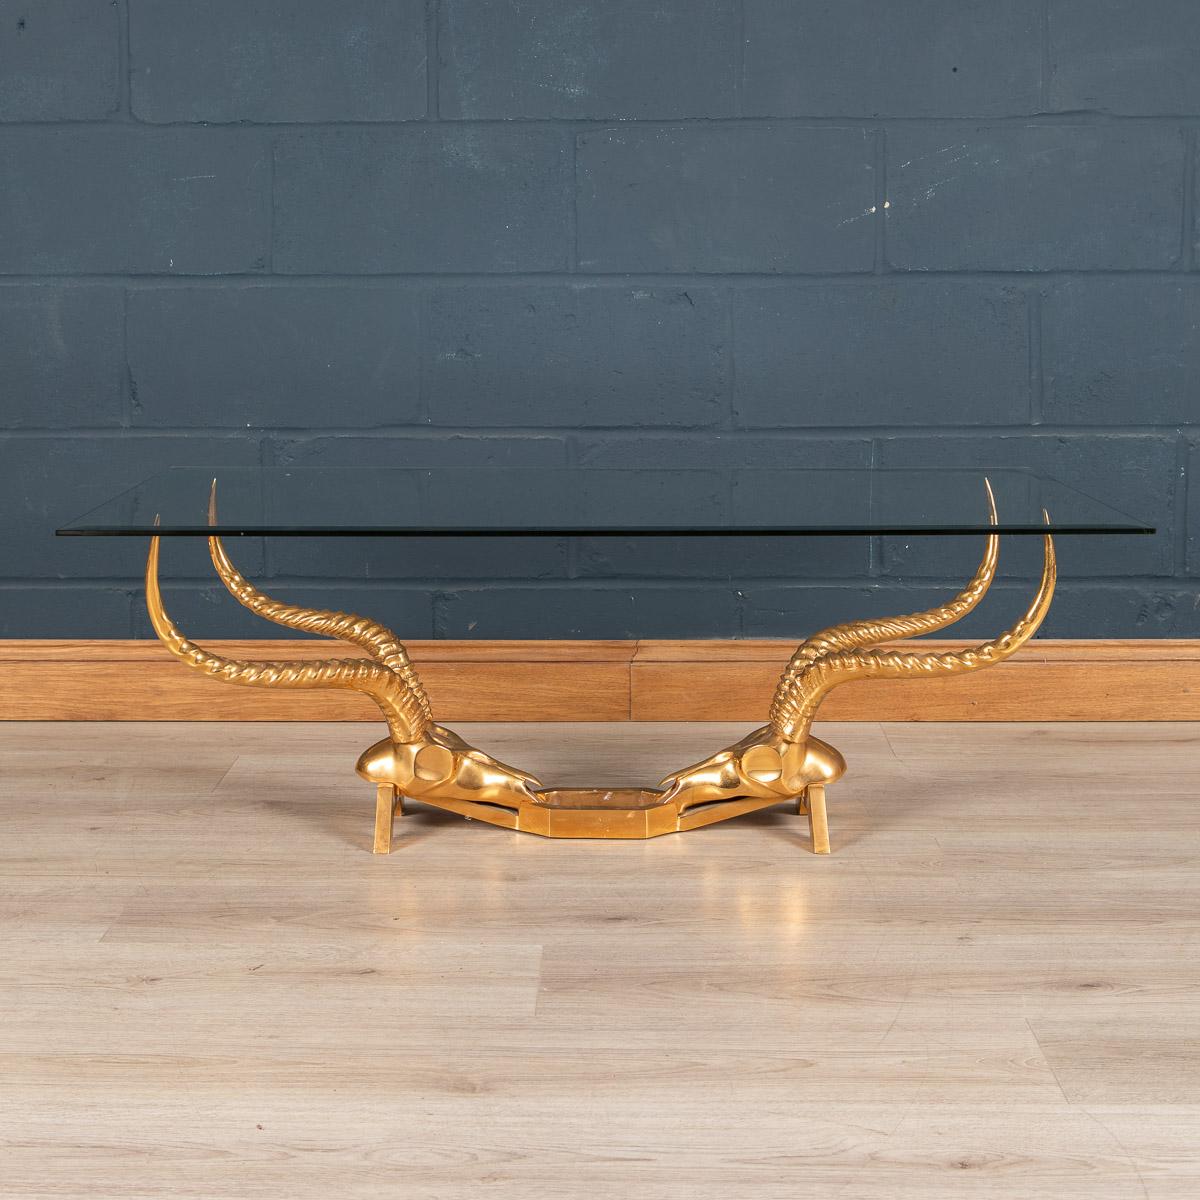 A vintage glass-topped coffee table with gold antelope skull and horn base designed by Dikran Khoubesserian for Fondica. Dikran Khoubesserian (1913-1991) was born into an Armenian family in Mersina, Turkey. At the age of ten he was sent to Paris